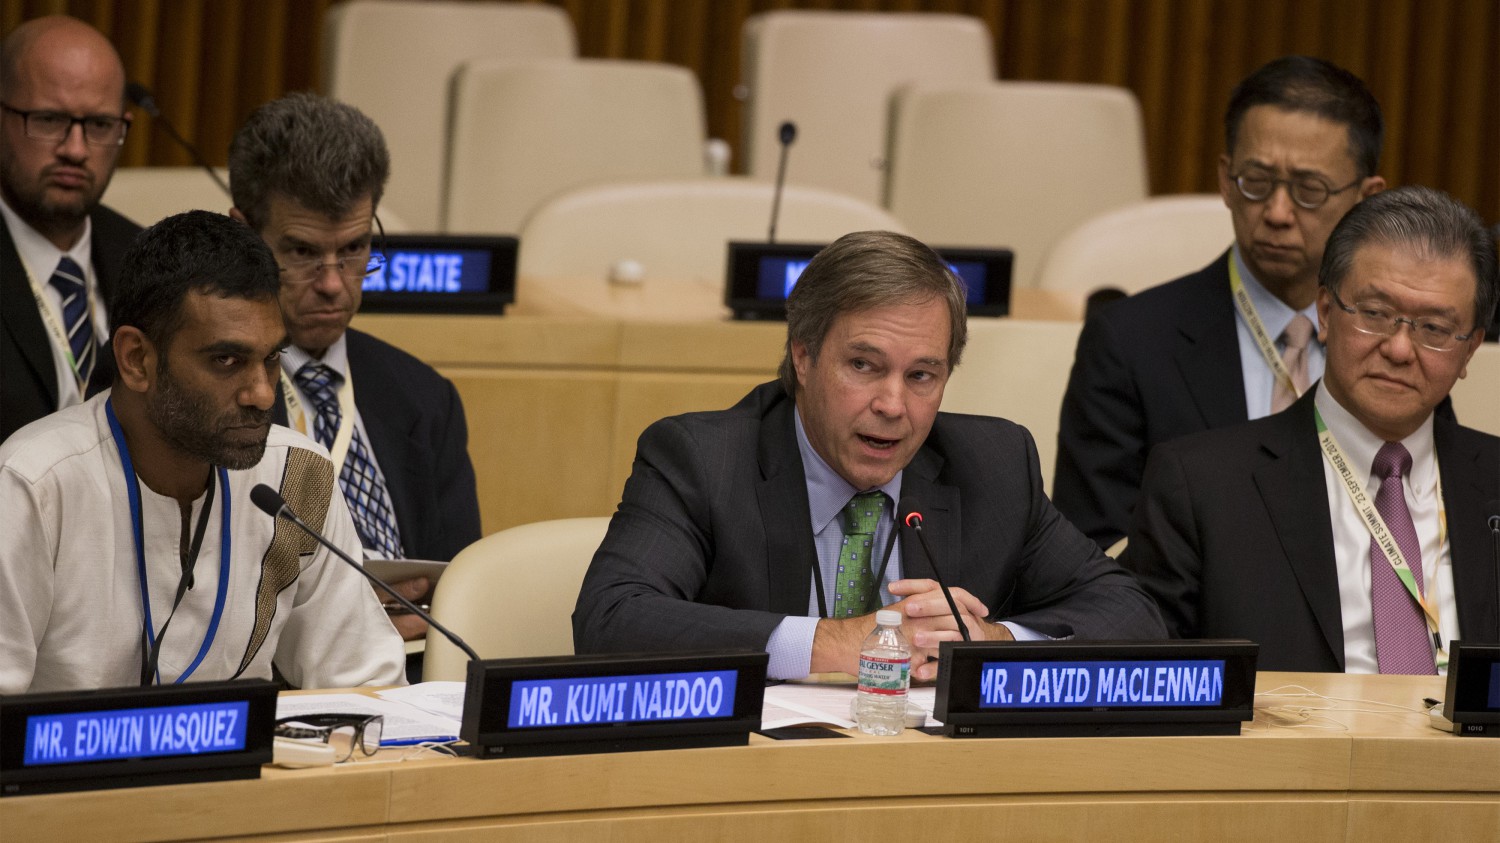 Cargill Chief Executive David MacLennan addressed the Climate Summit at the U.N. in 2014, after making a major commitment to end deforestation.